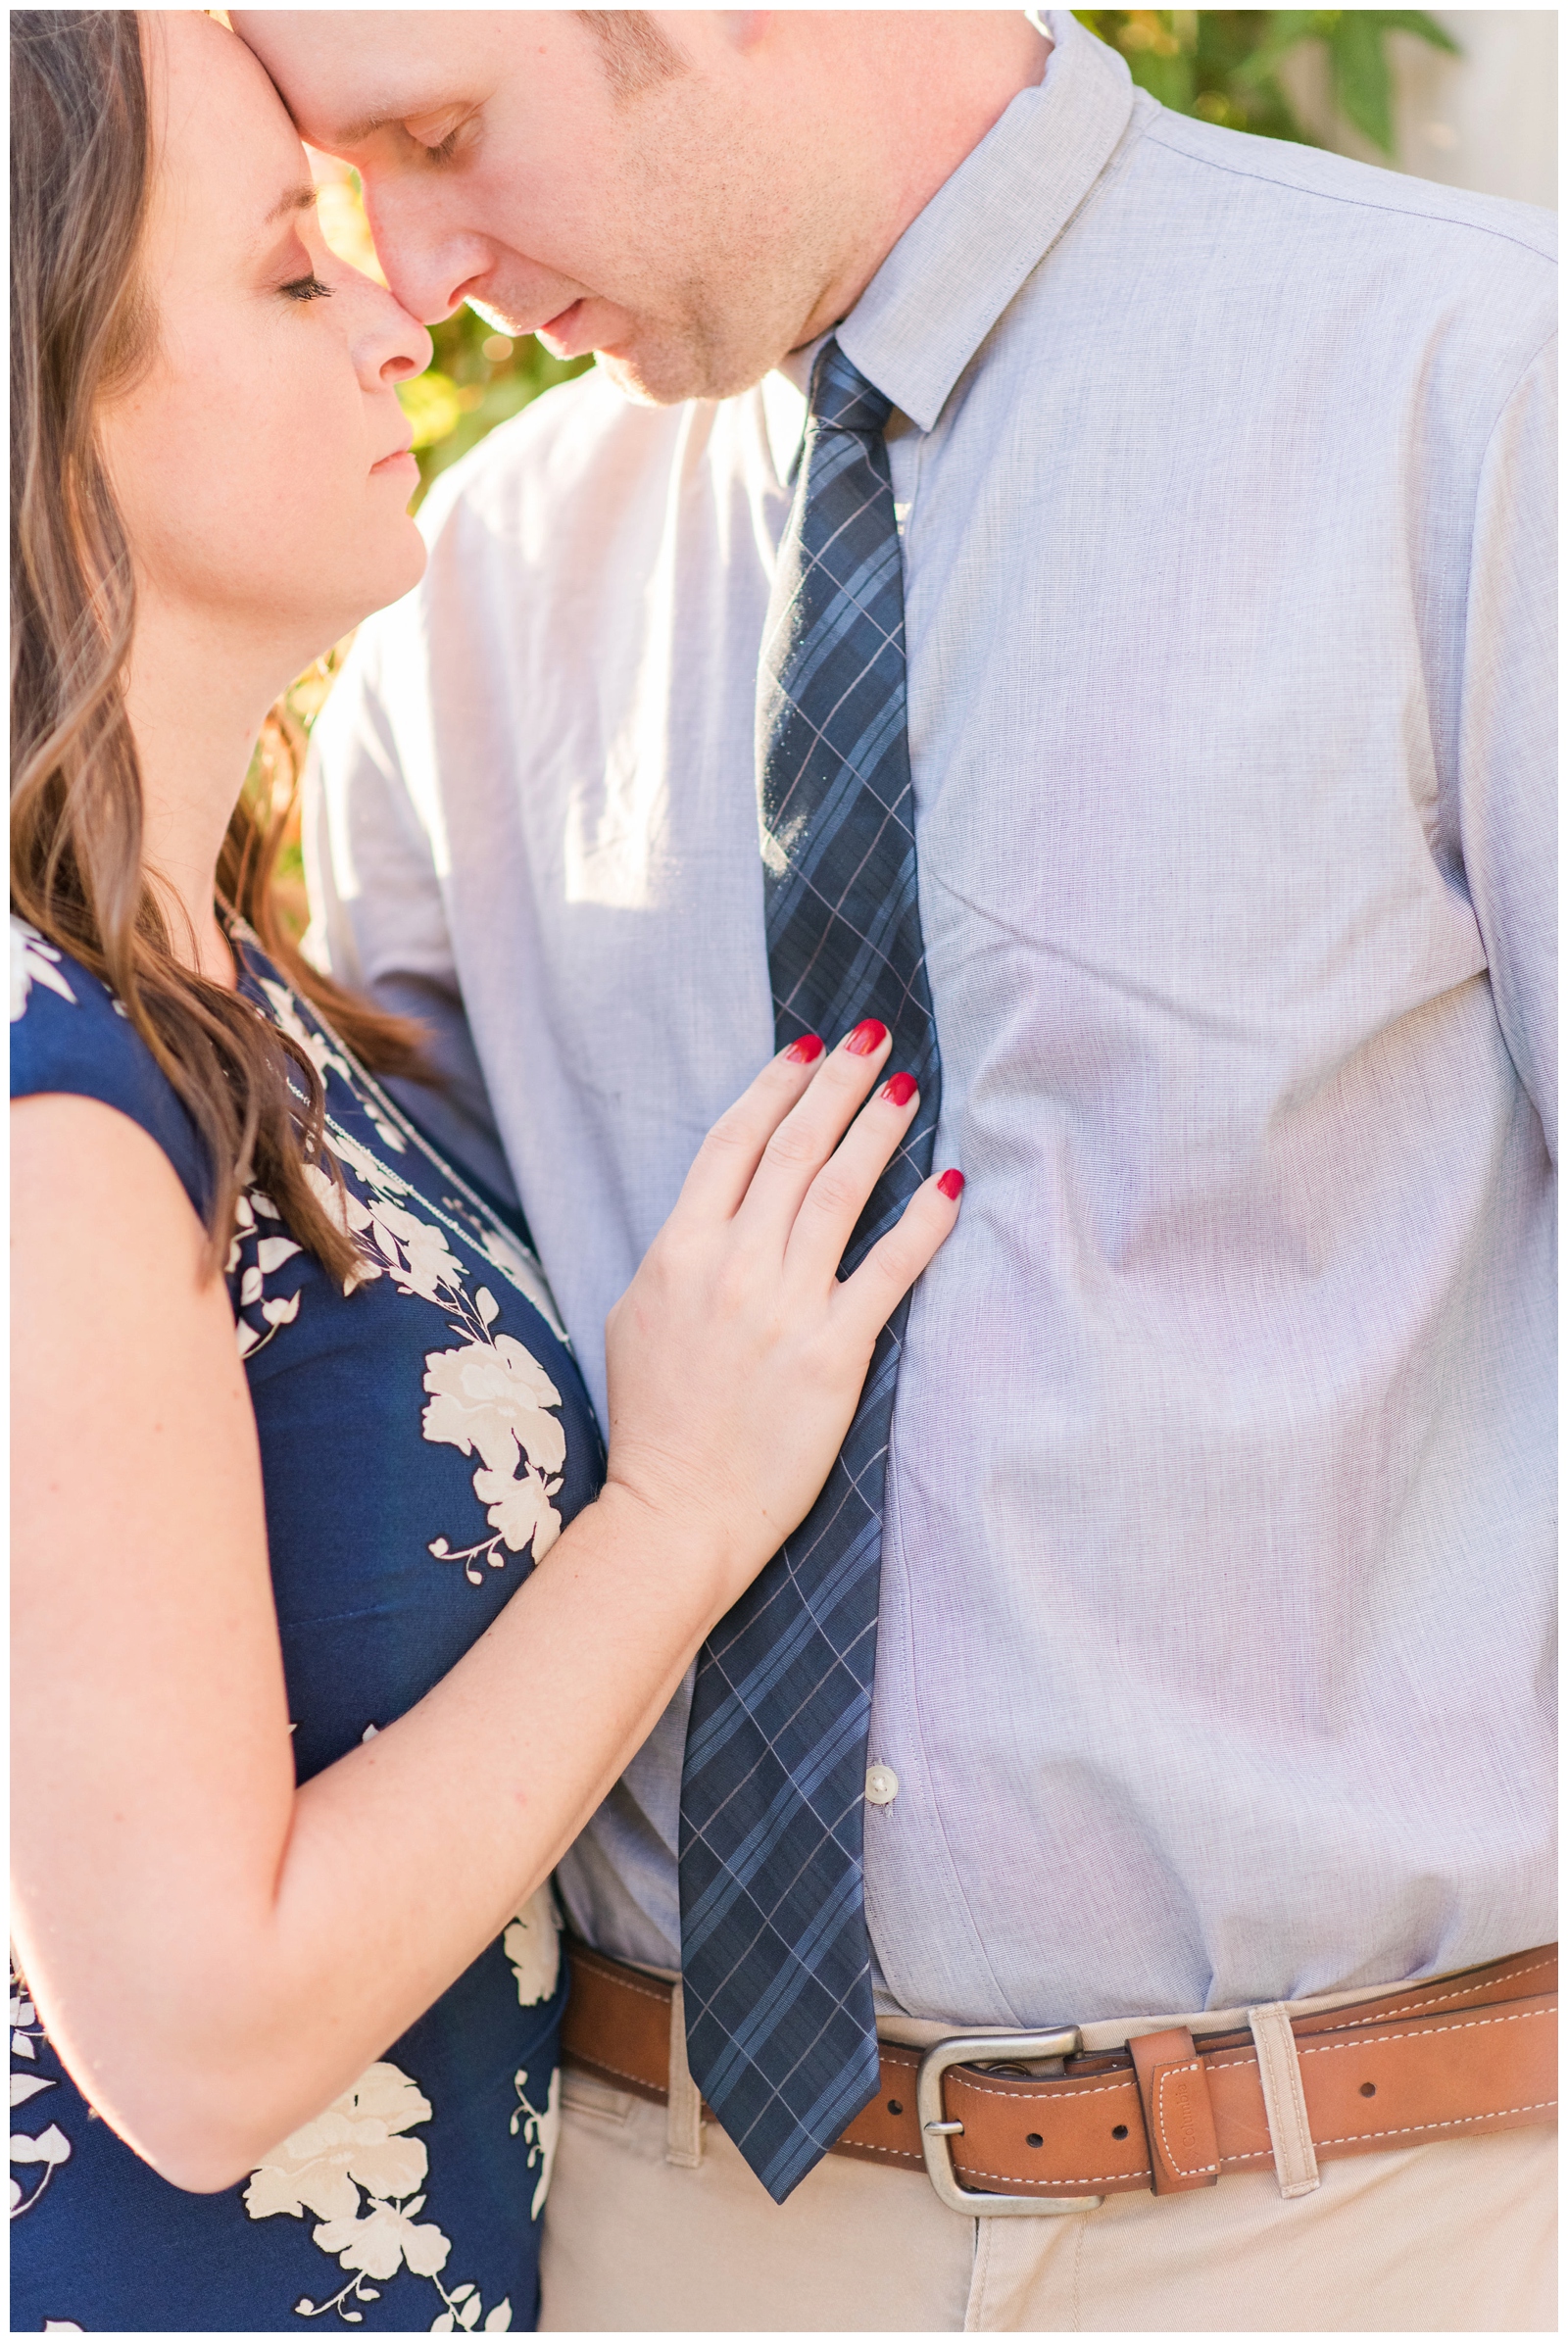 bride and groom touch noses during engagement portraits while bride touches groom's tie with red painted nails